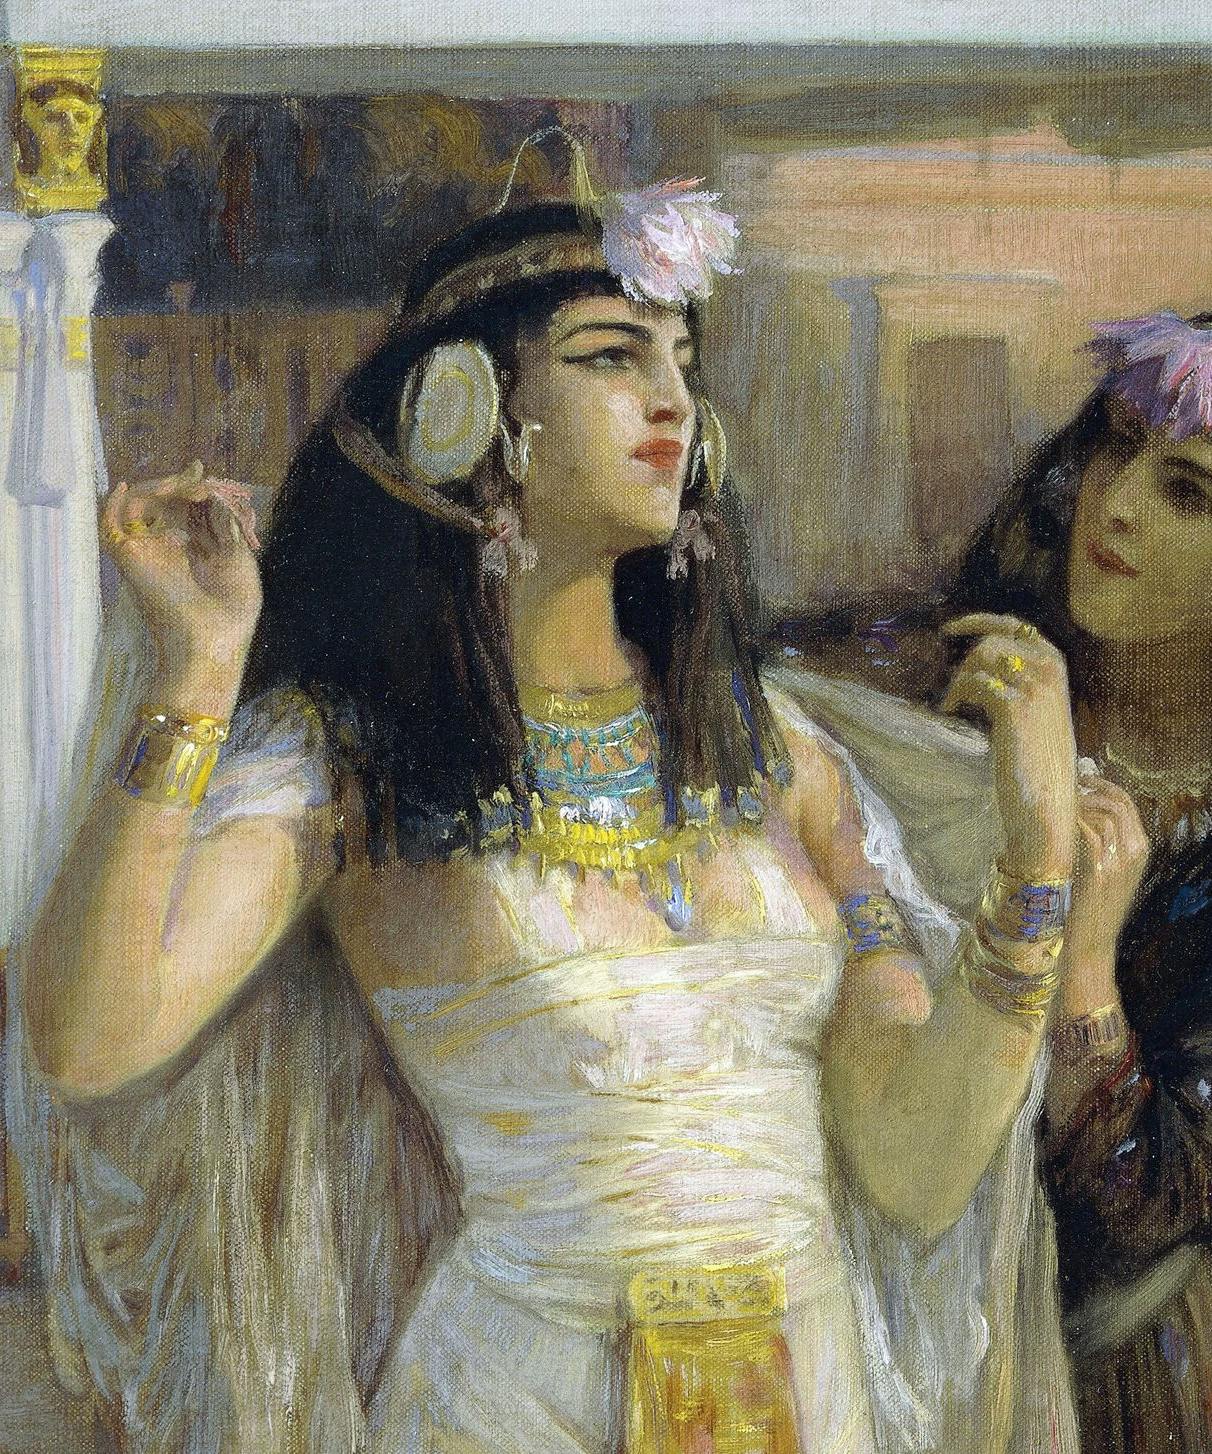 Cleopatra On The Terraces Of Philae painting by Frederic Arthur Bridgman, 1896 public domain wikimedia commons